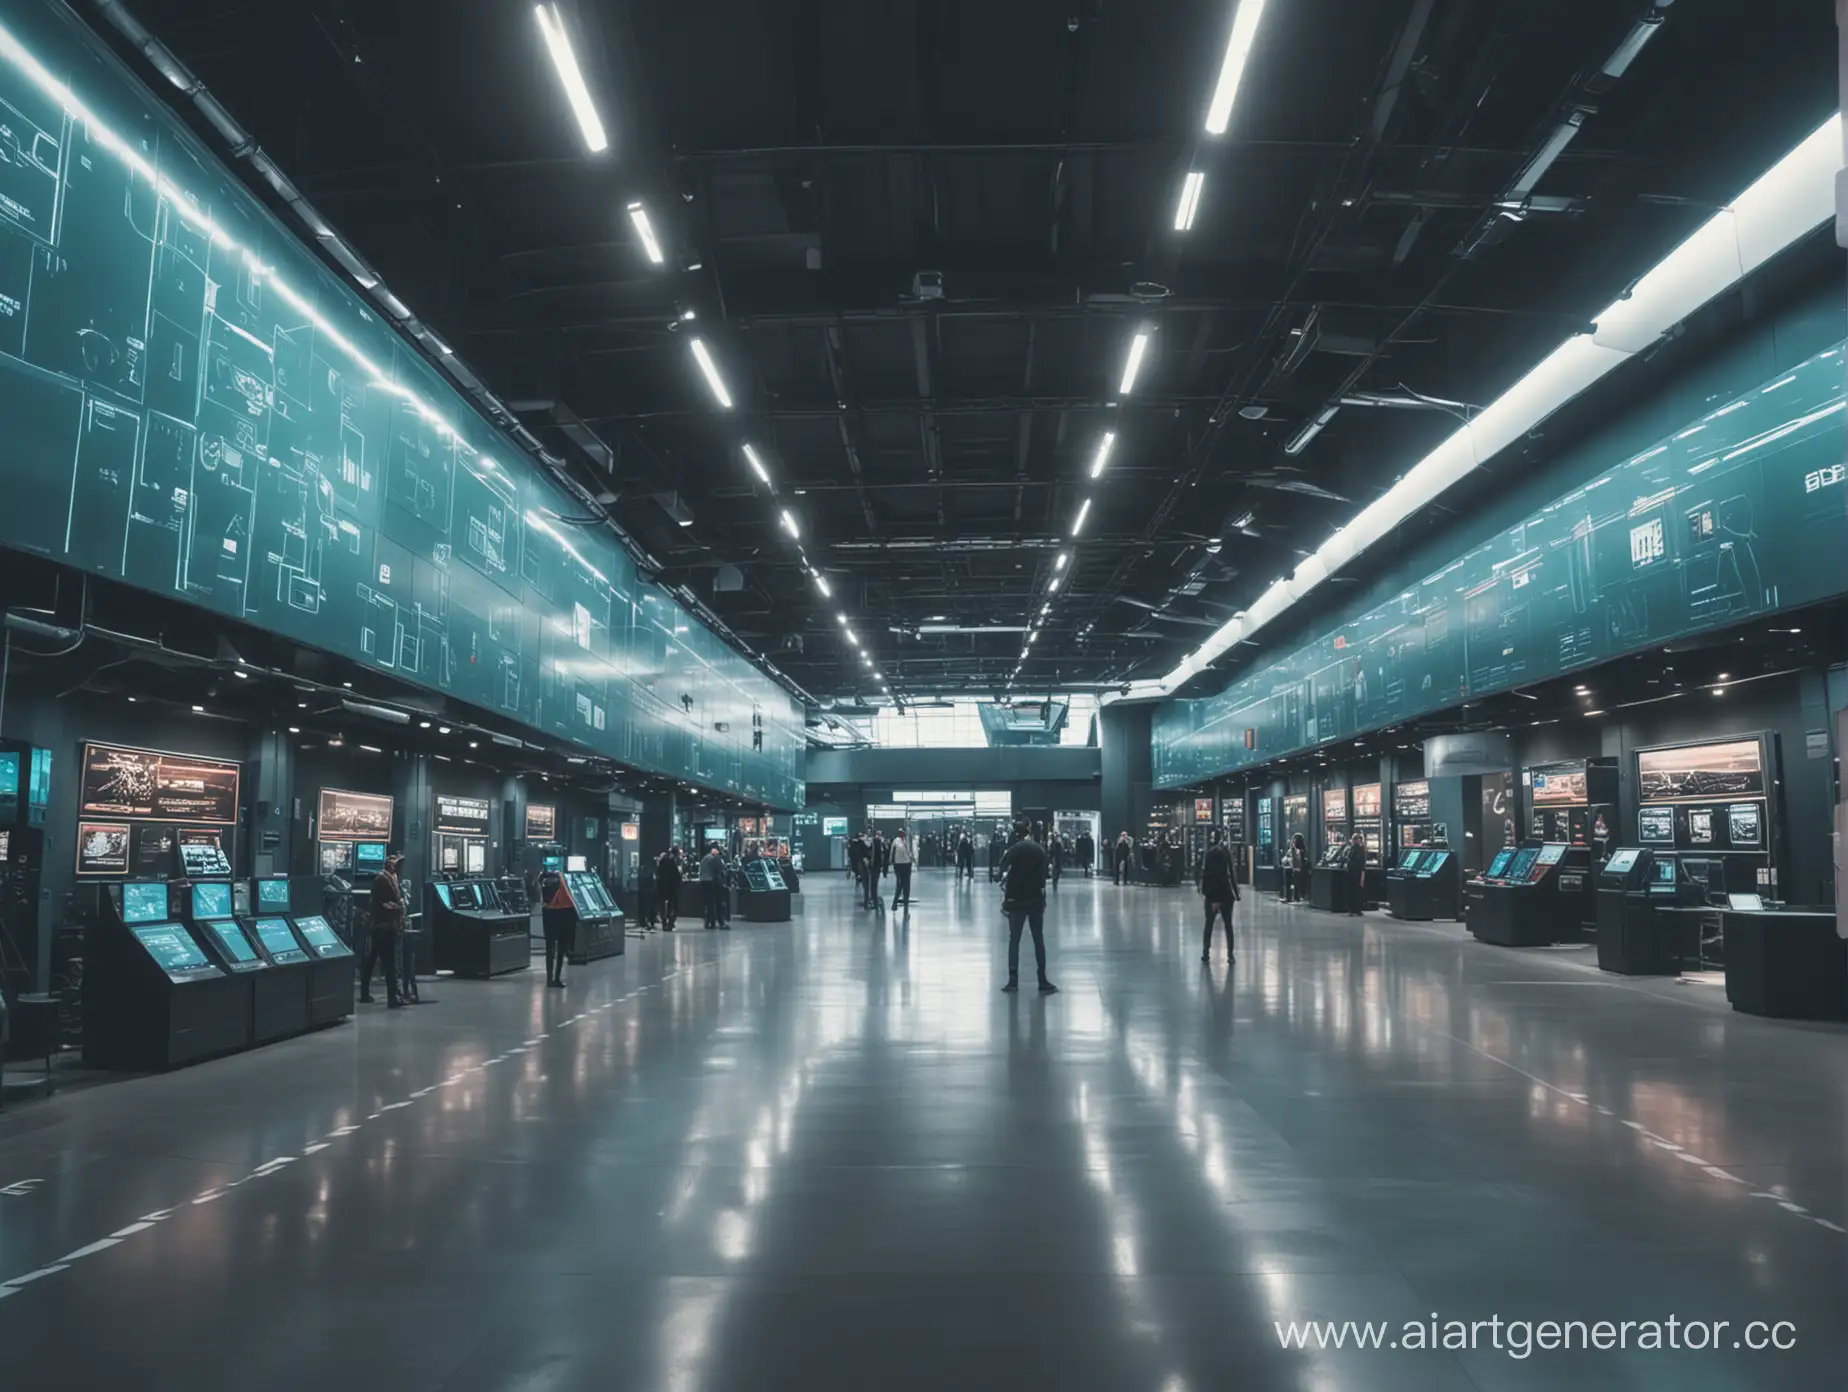 Futuristic-Technology-Exhibit-WideAngle-Shot-of-a-HiTech-Museum-with-CoolToned-SciFi-Ambiance